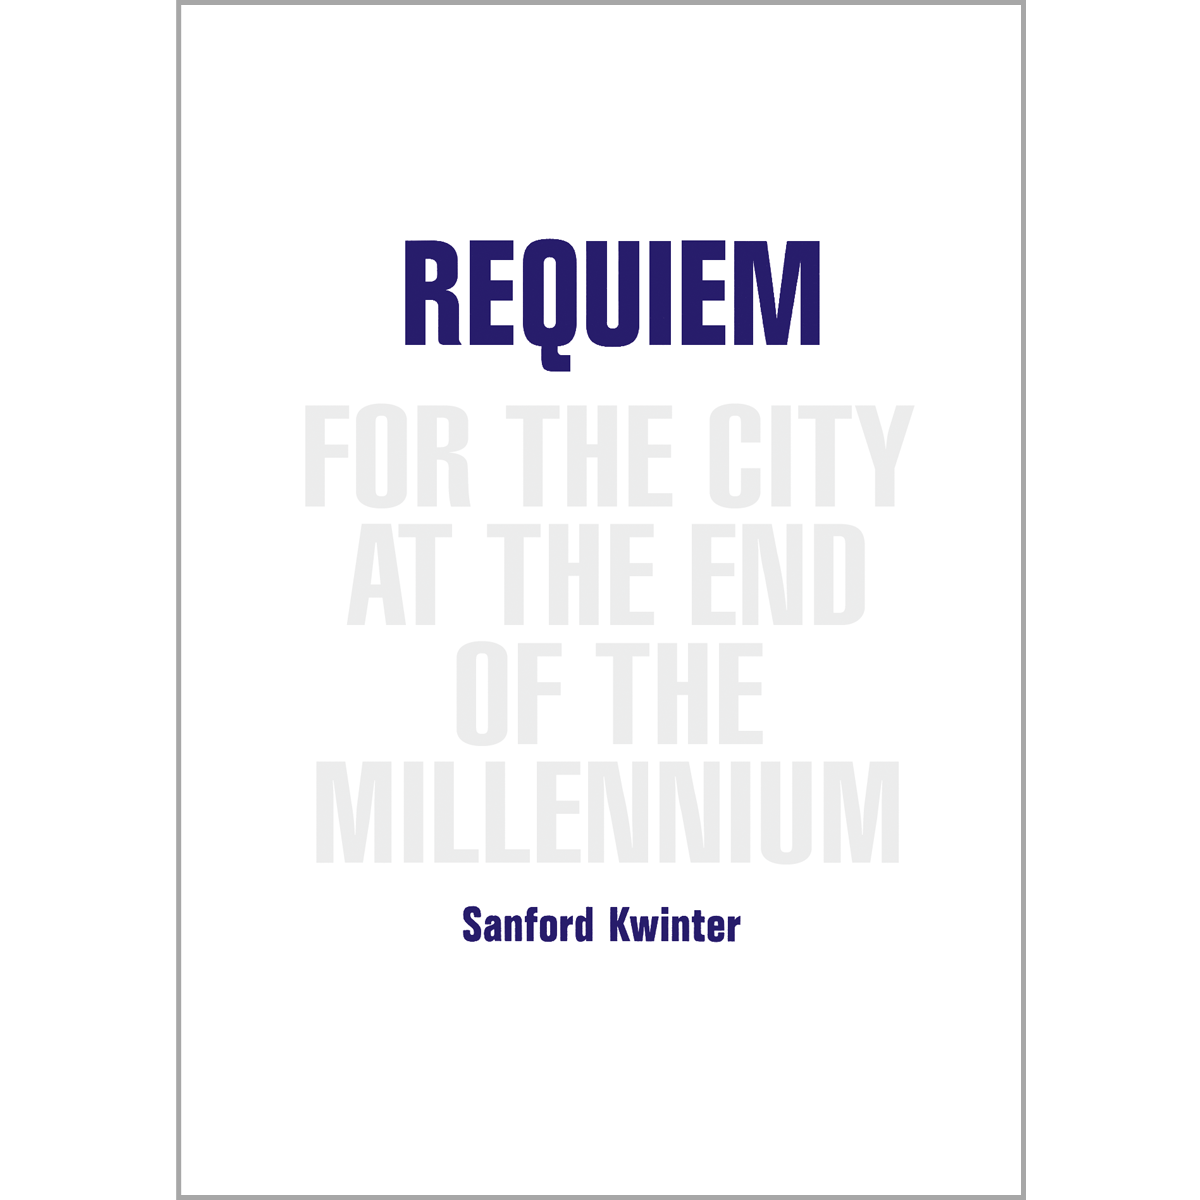 Requiem for the City  at the End of the Millennium